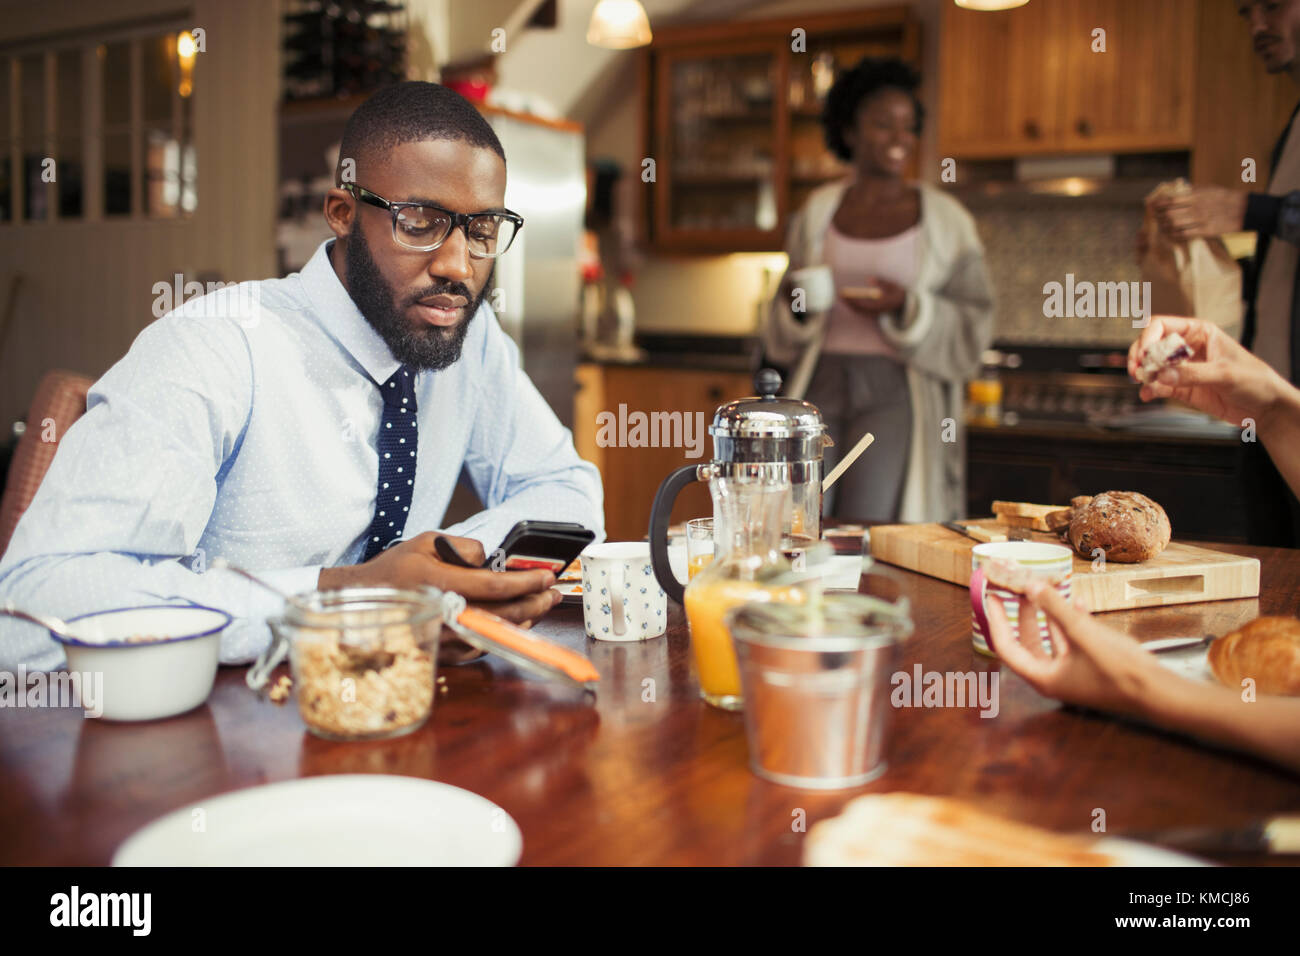 Businessman texting with smart phone at breakfast table Stock Photo